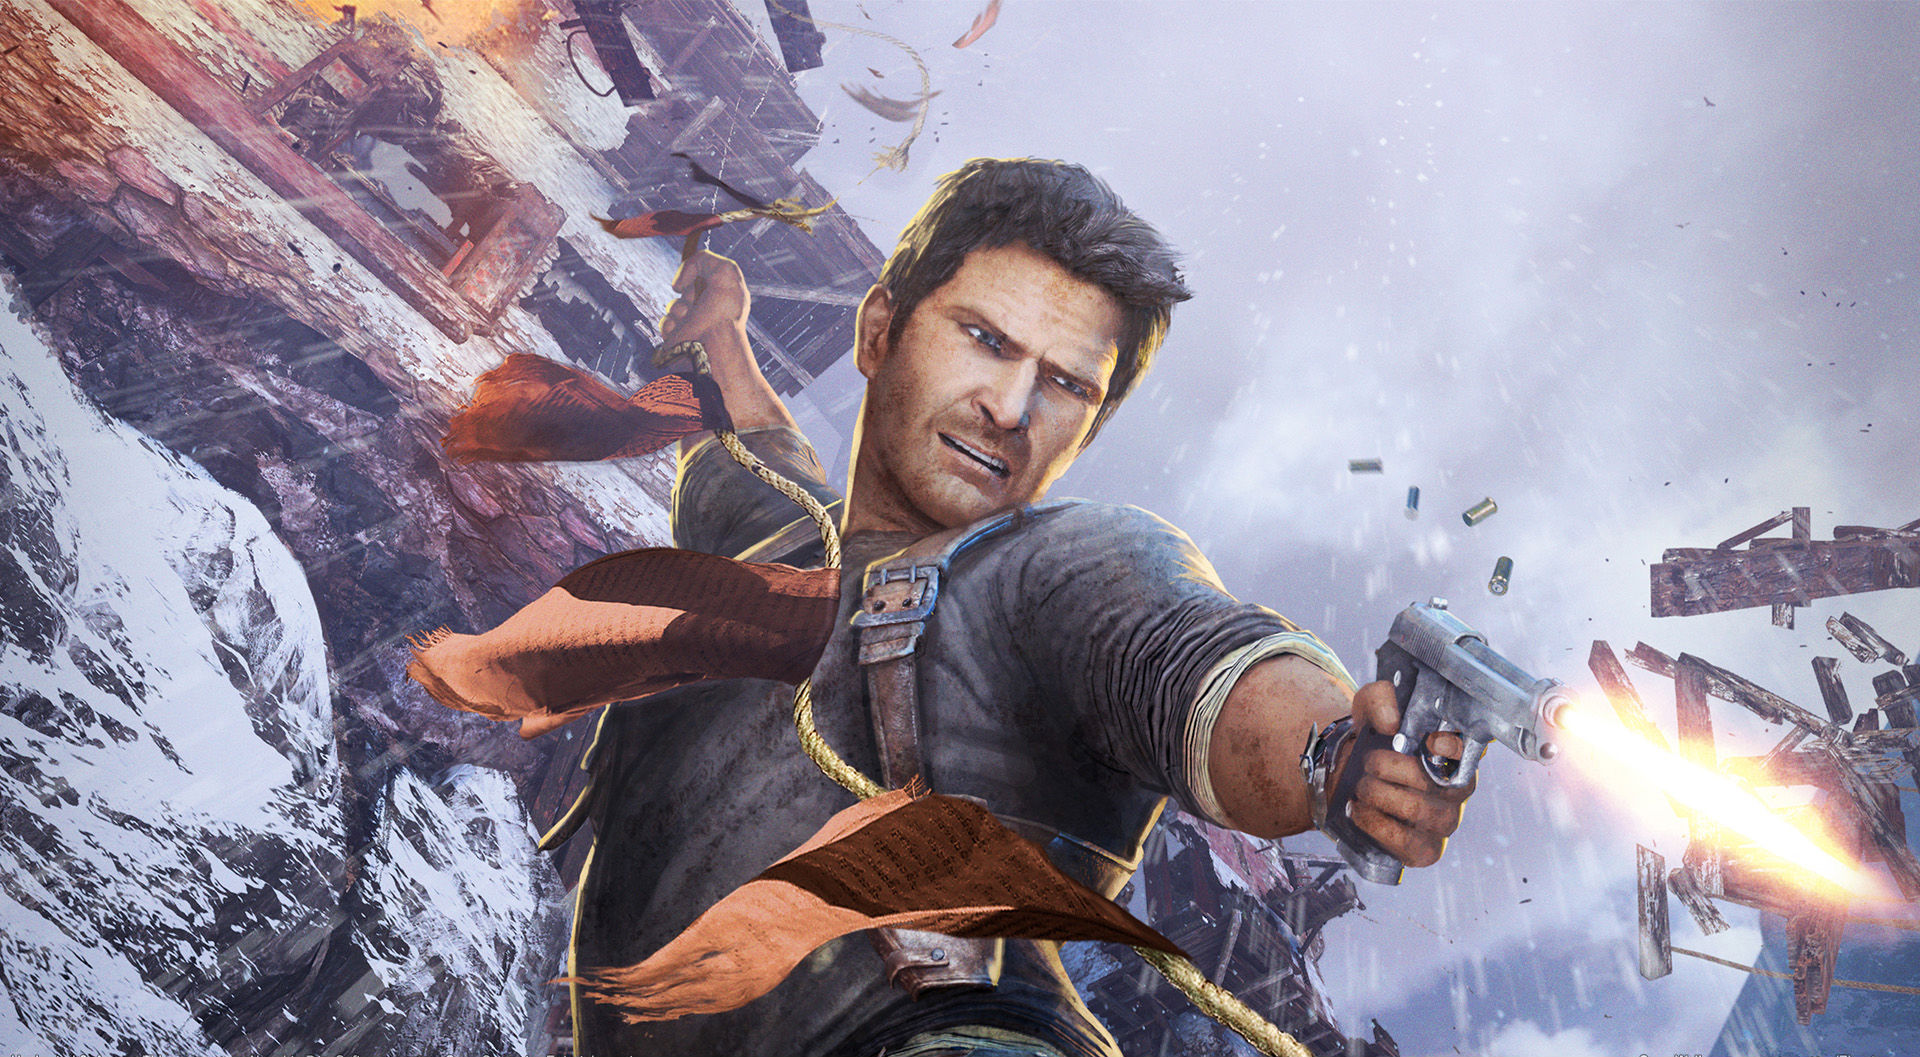 Video Game Uncharted 2: Among Thieves HD Wallpaper | Background Image